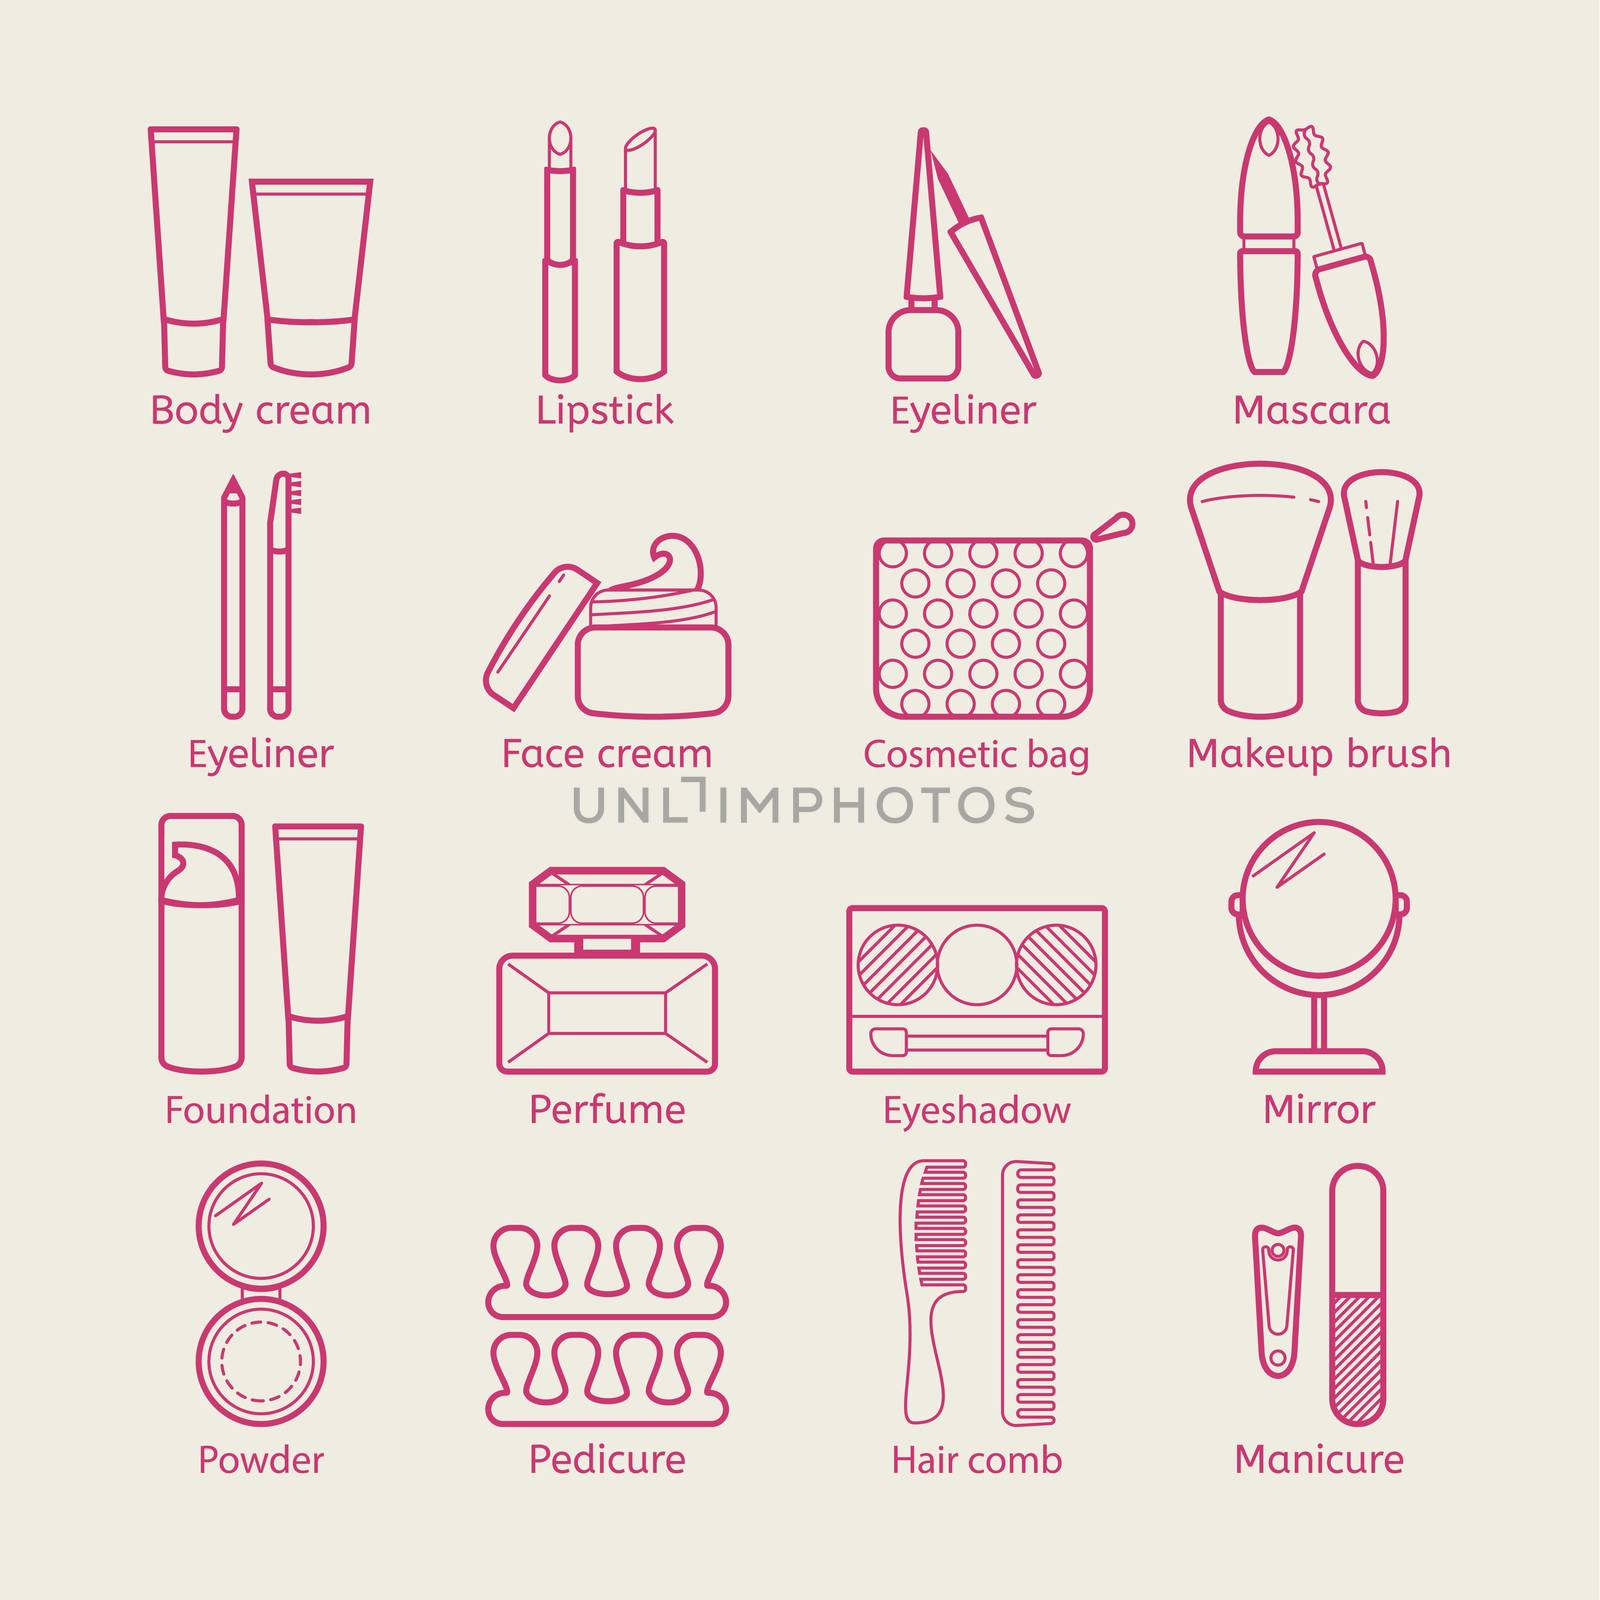  cosmetic icons. Mascara, lipstick, powder, eye shadow, perfume, cream, foundation, eyeliner, mirror, hair comb and other make-up items. Makeup thin linear signs for manicure, pedicure and Visage.